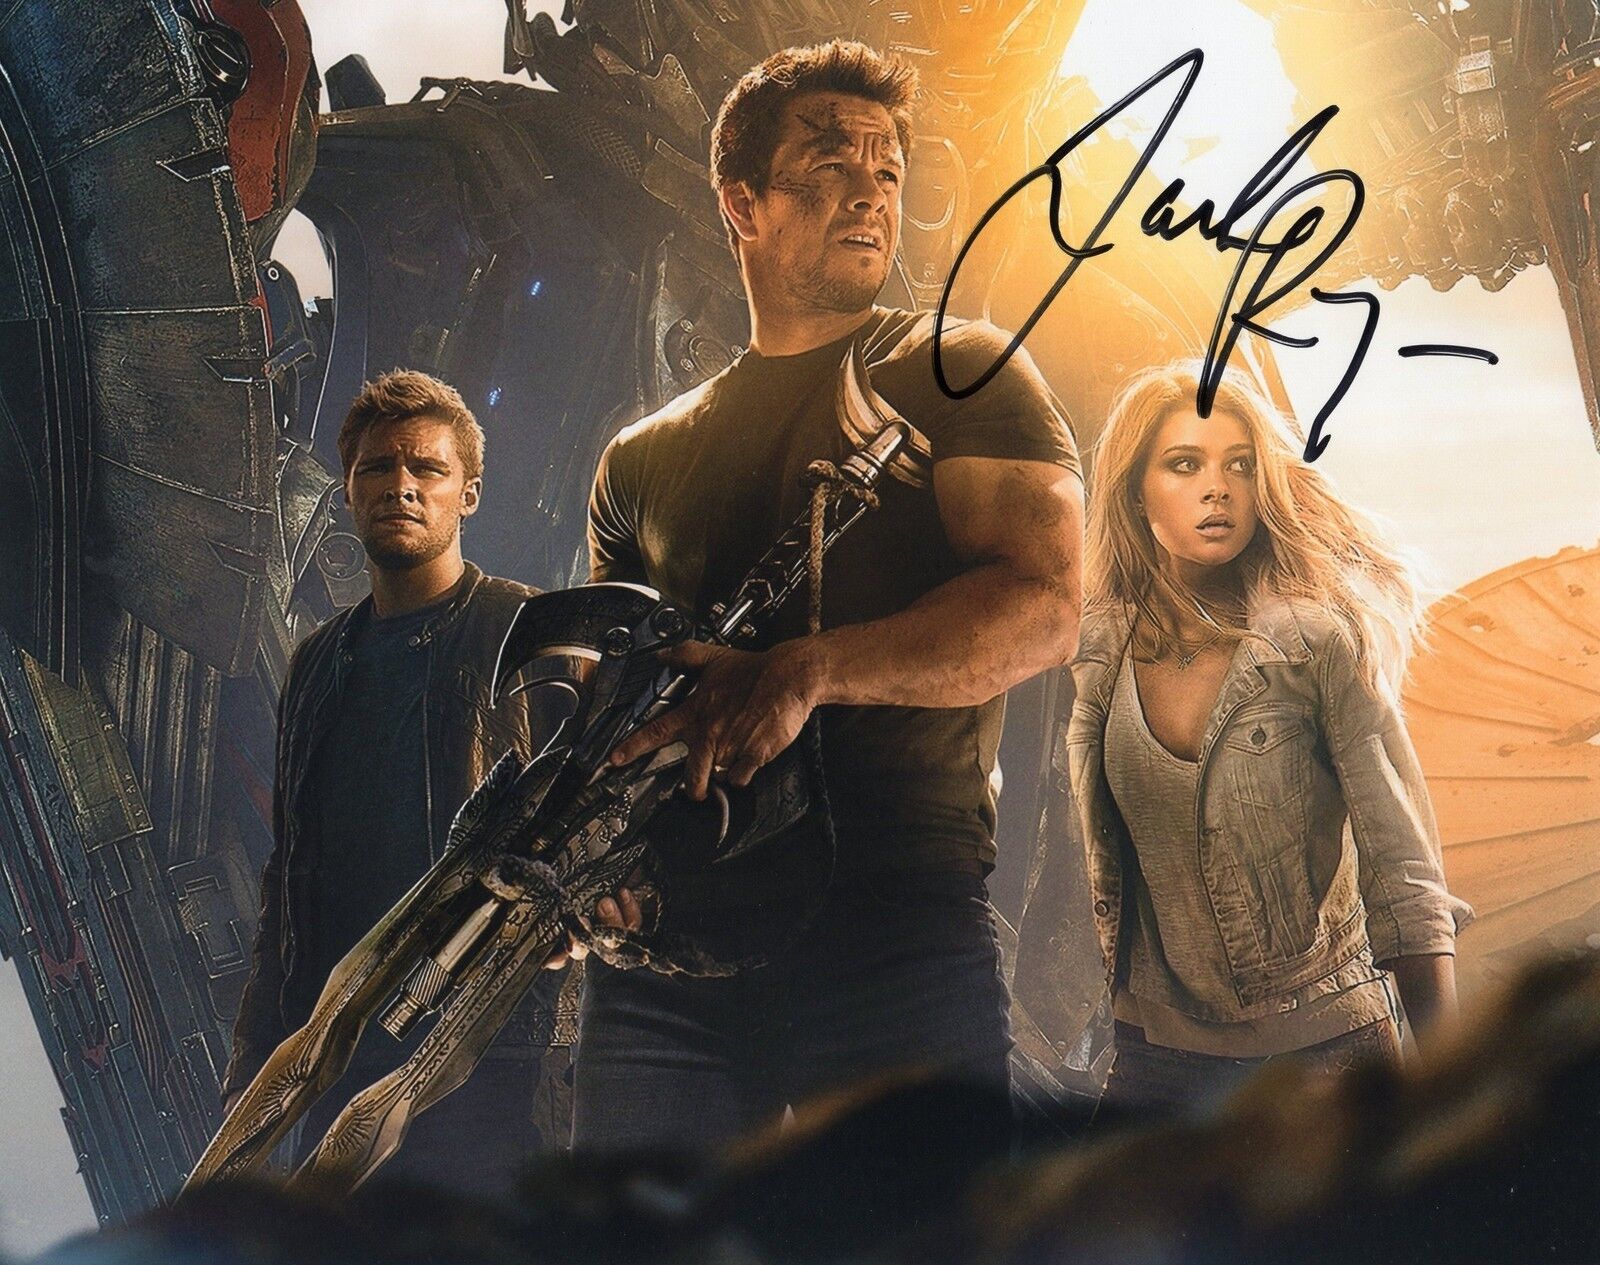 Jack Reynor Transformers 4 Age of Extinction Signed 8x10 Photo Poster painting w/COA #5